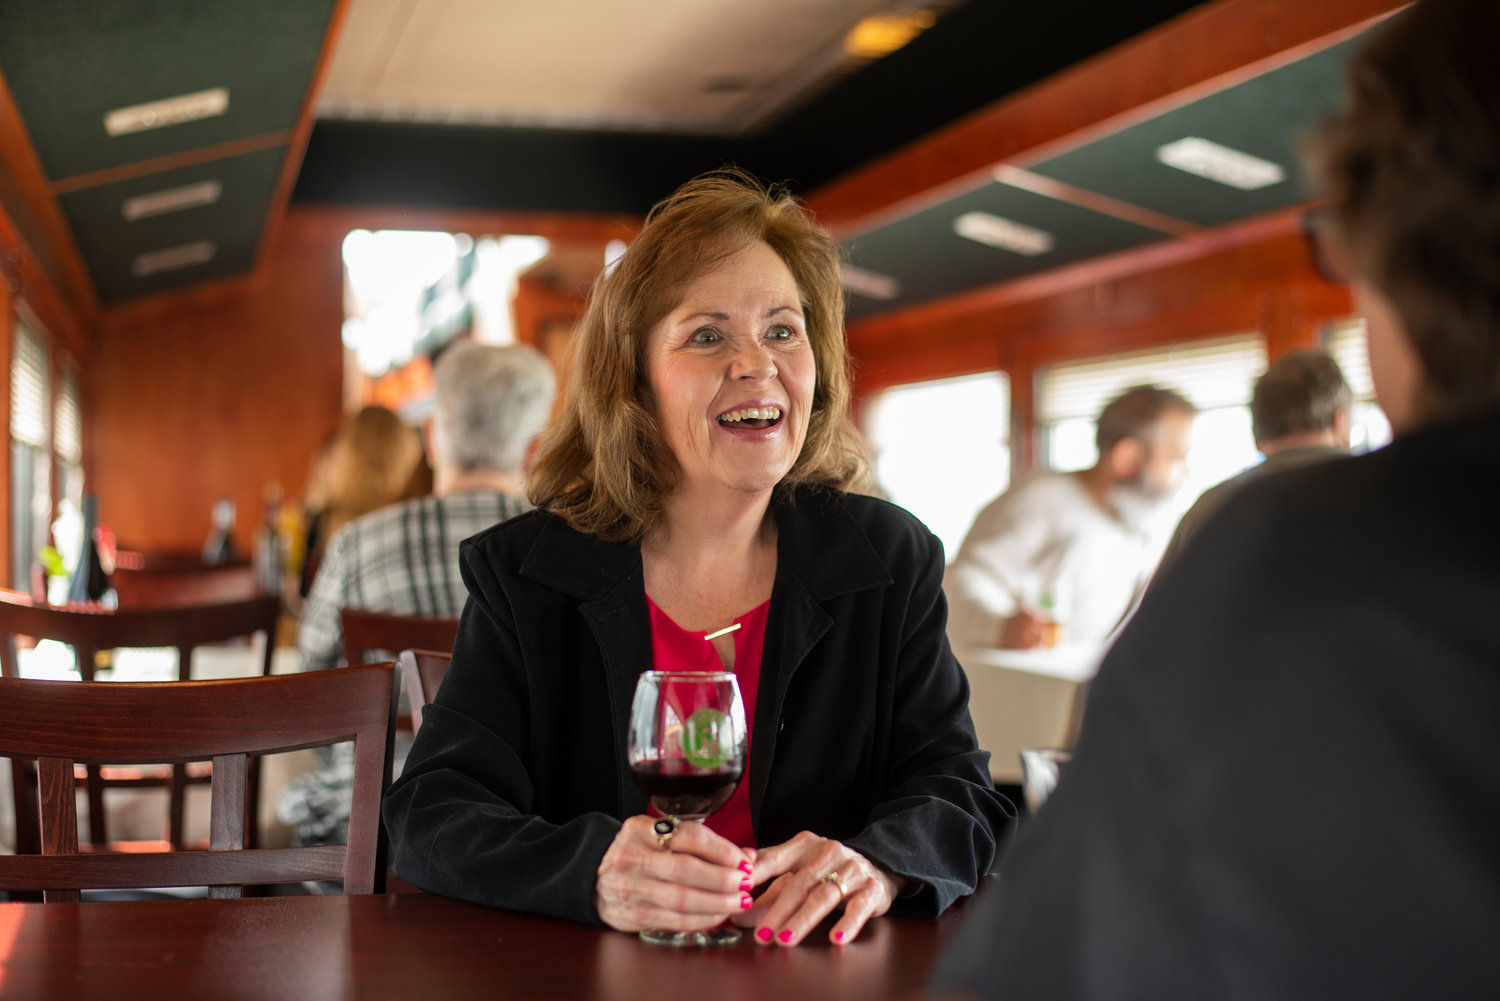 A passenger about the Adirondack Railroad’s Beer and Wine Train.